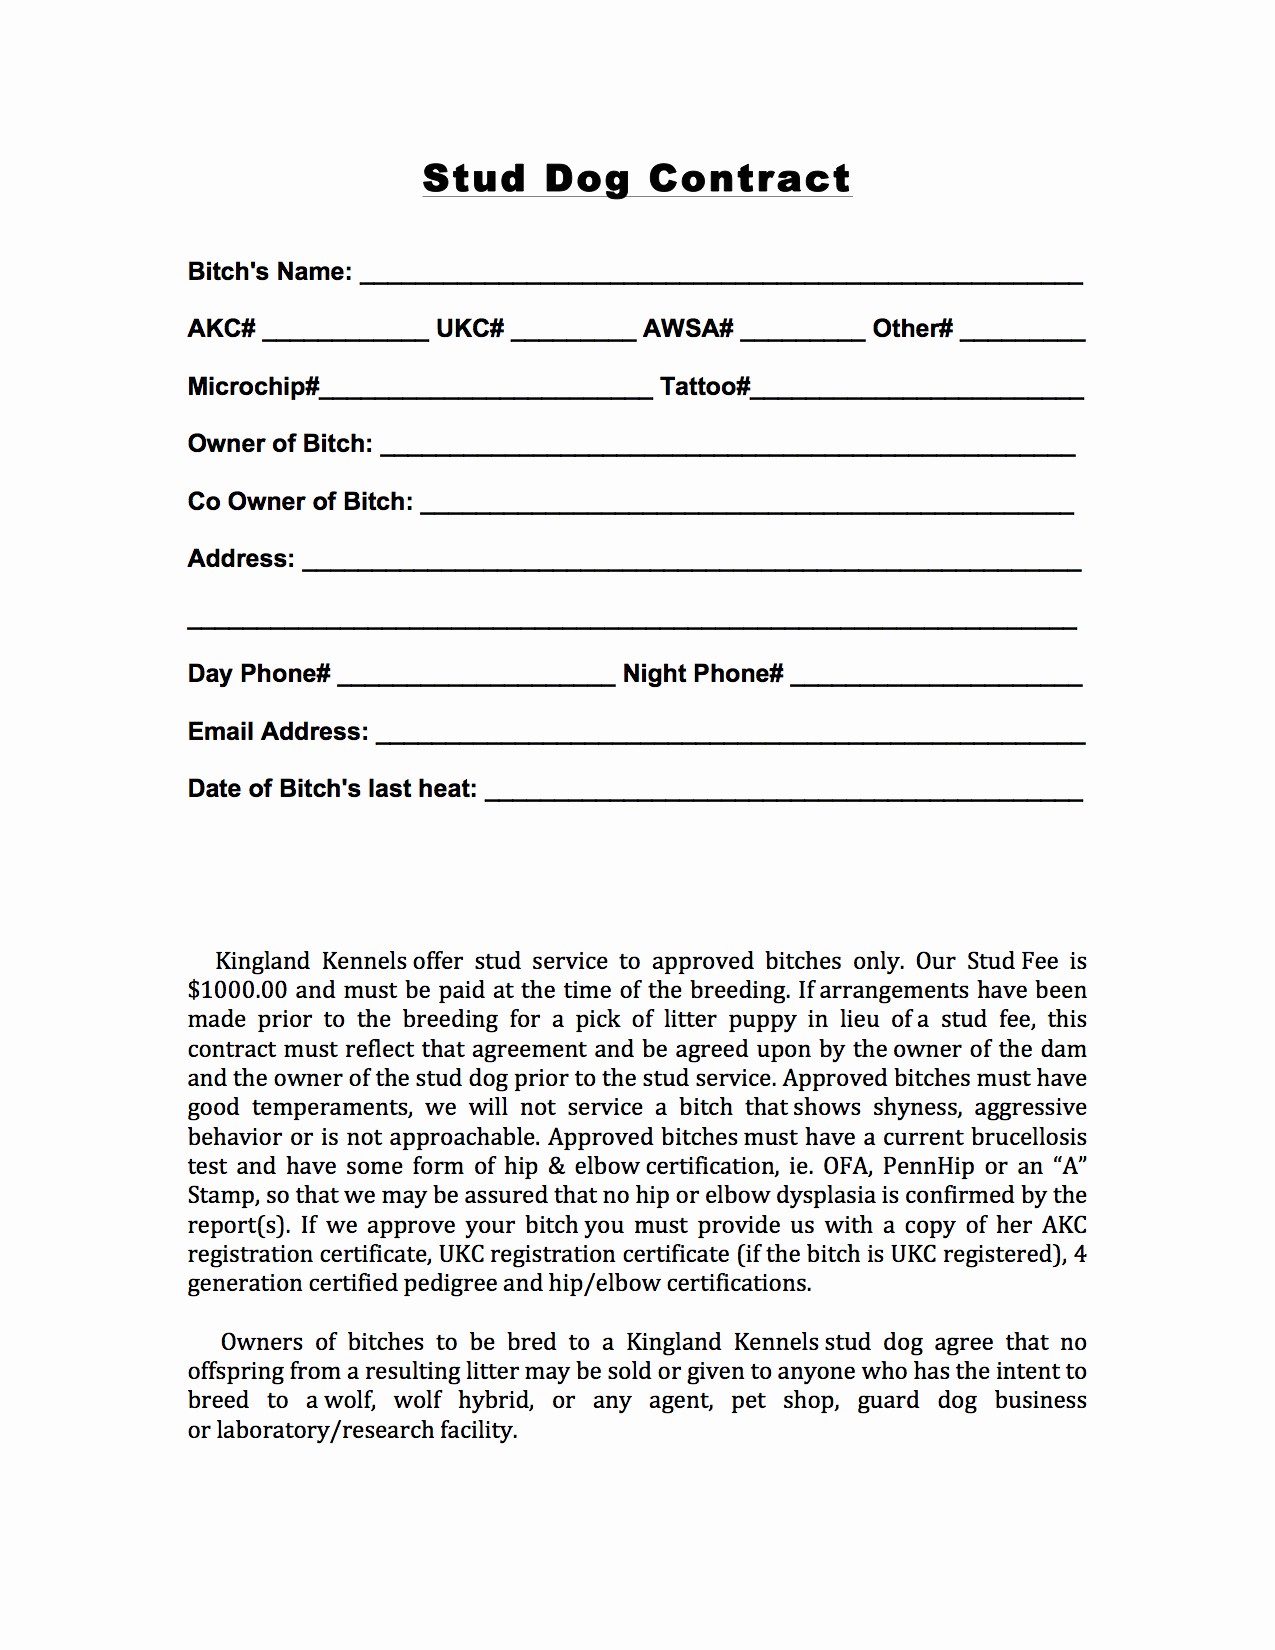 Stud Service Contract Template Awesome Dog Breeding